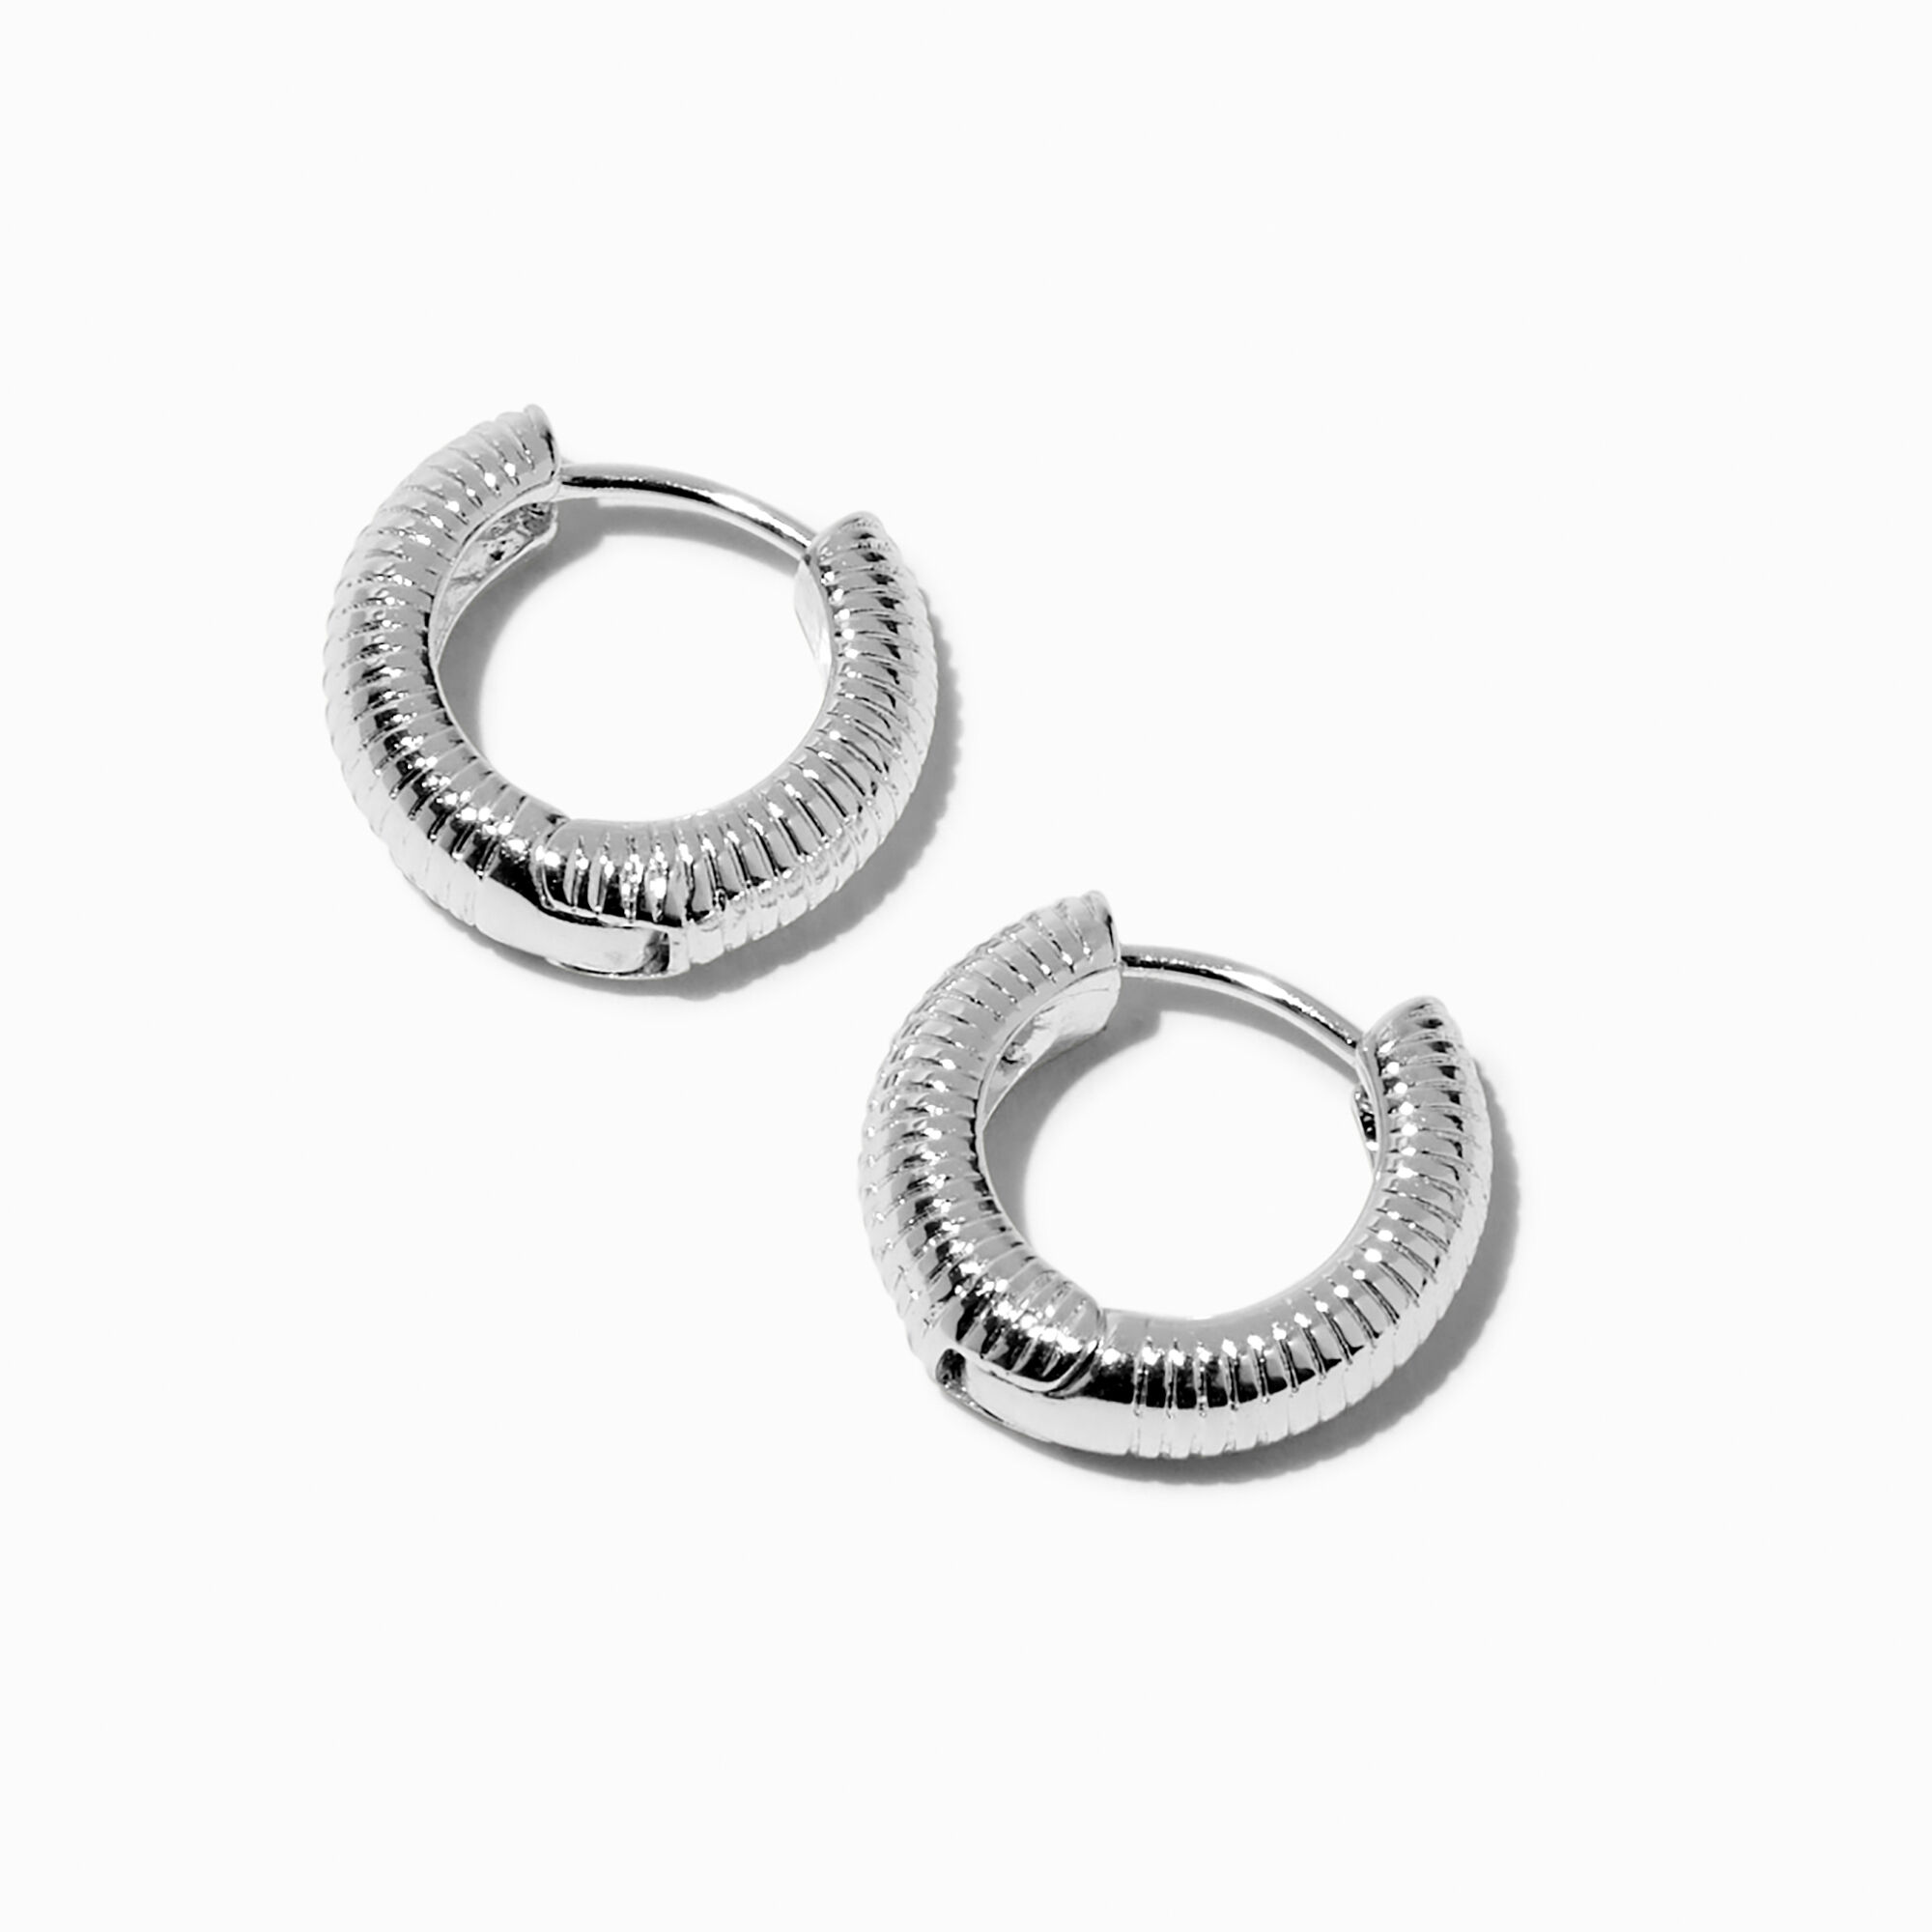 View Claires Tone 10MM Ridged Clicker Hoop Earrings Silver information